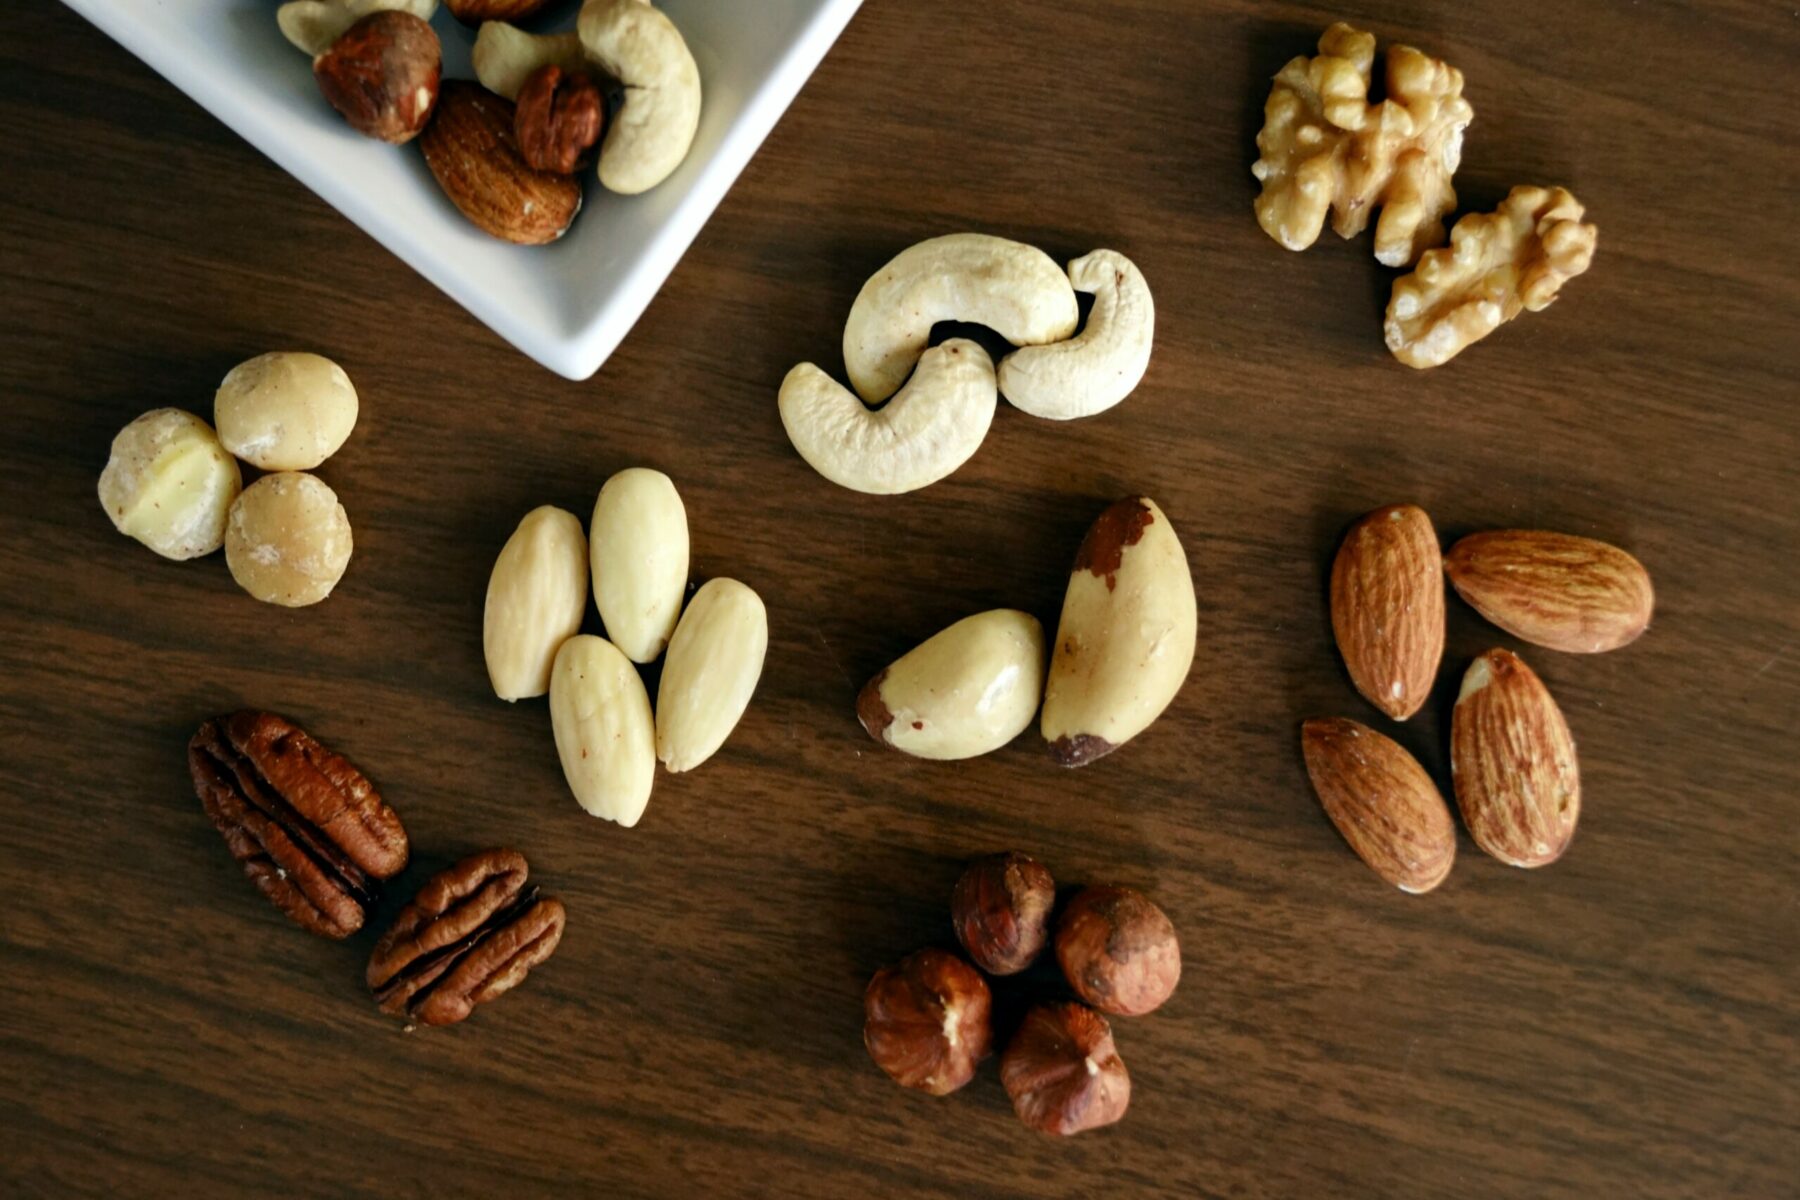 An assortment of nuts.